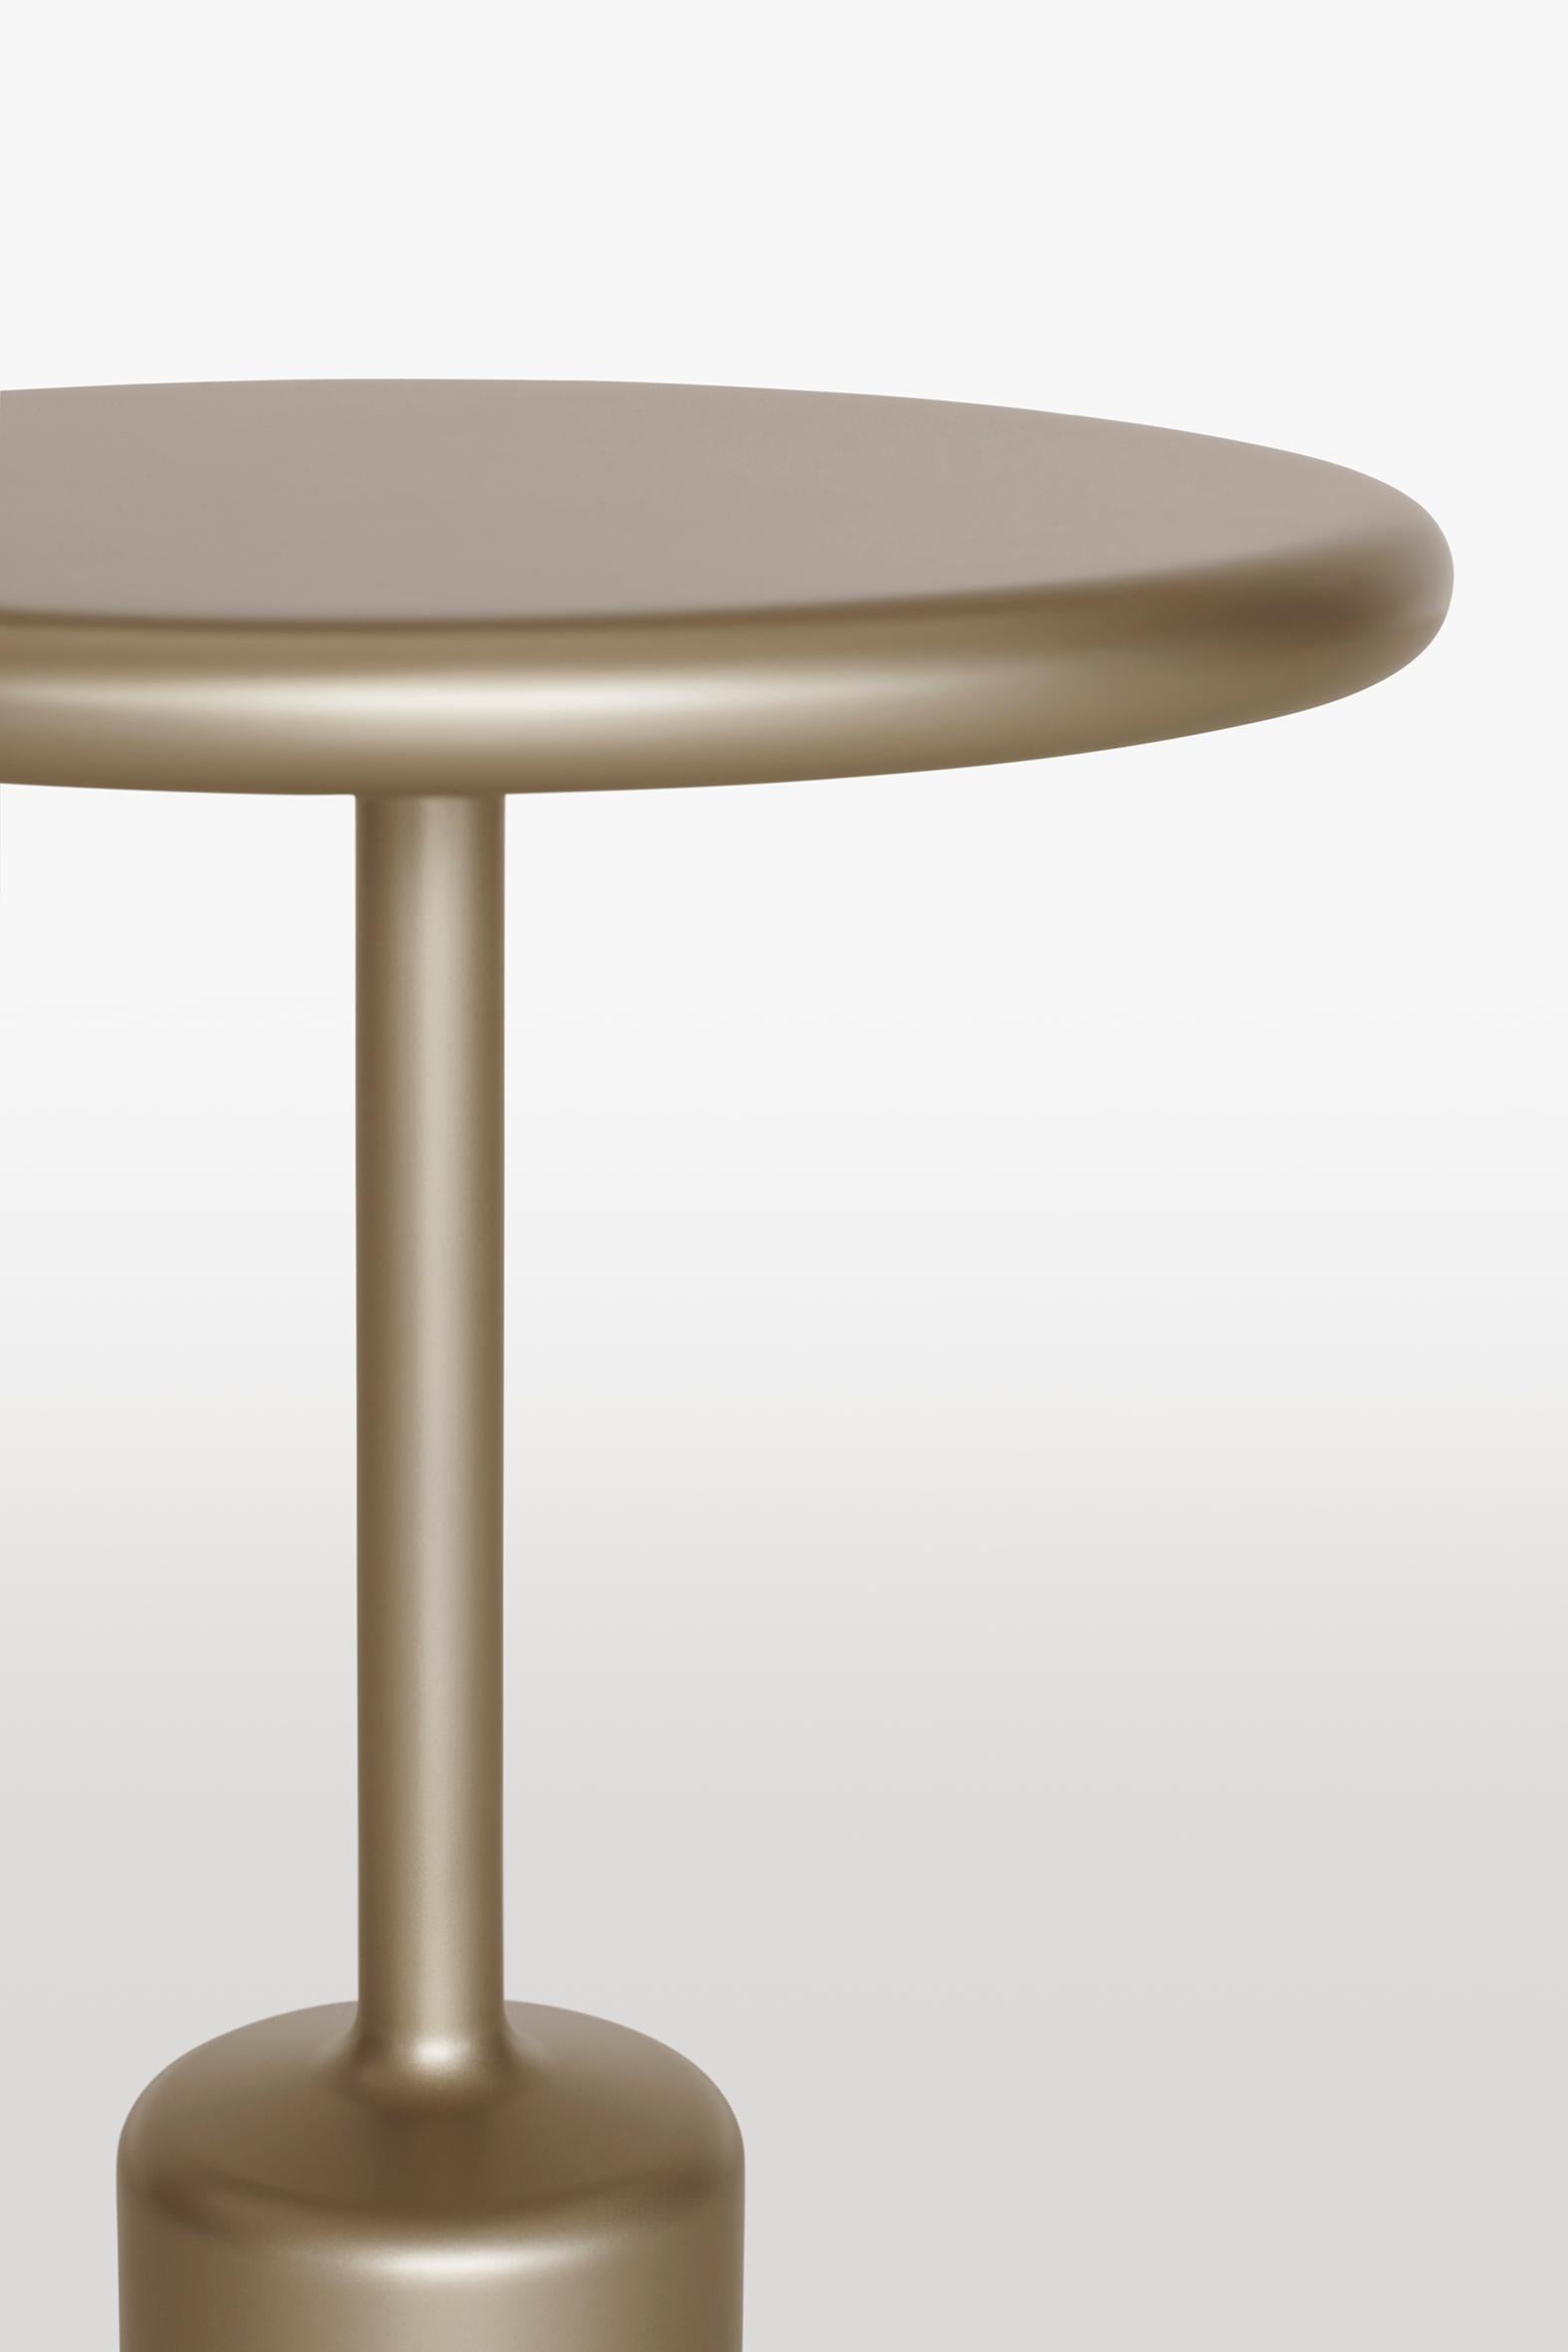 Tavolotto is a set of 3 tables - same look, different proportions. Side table, center low table, accessory table. Tavolotto appears monolithic, almost as if it were made of a single block, though it is not. It is welded, then polished so perfectly